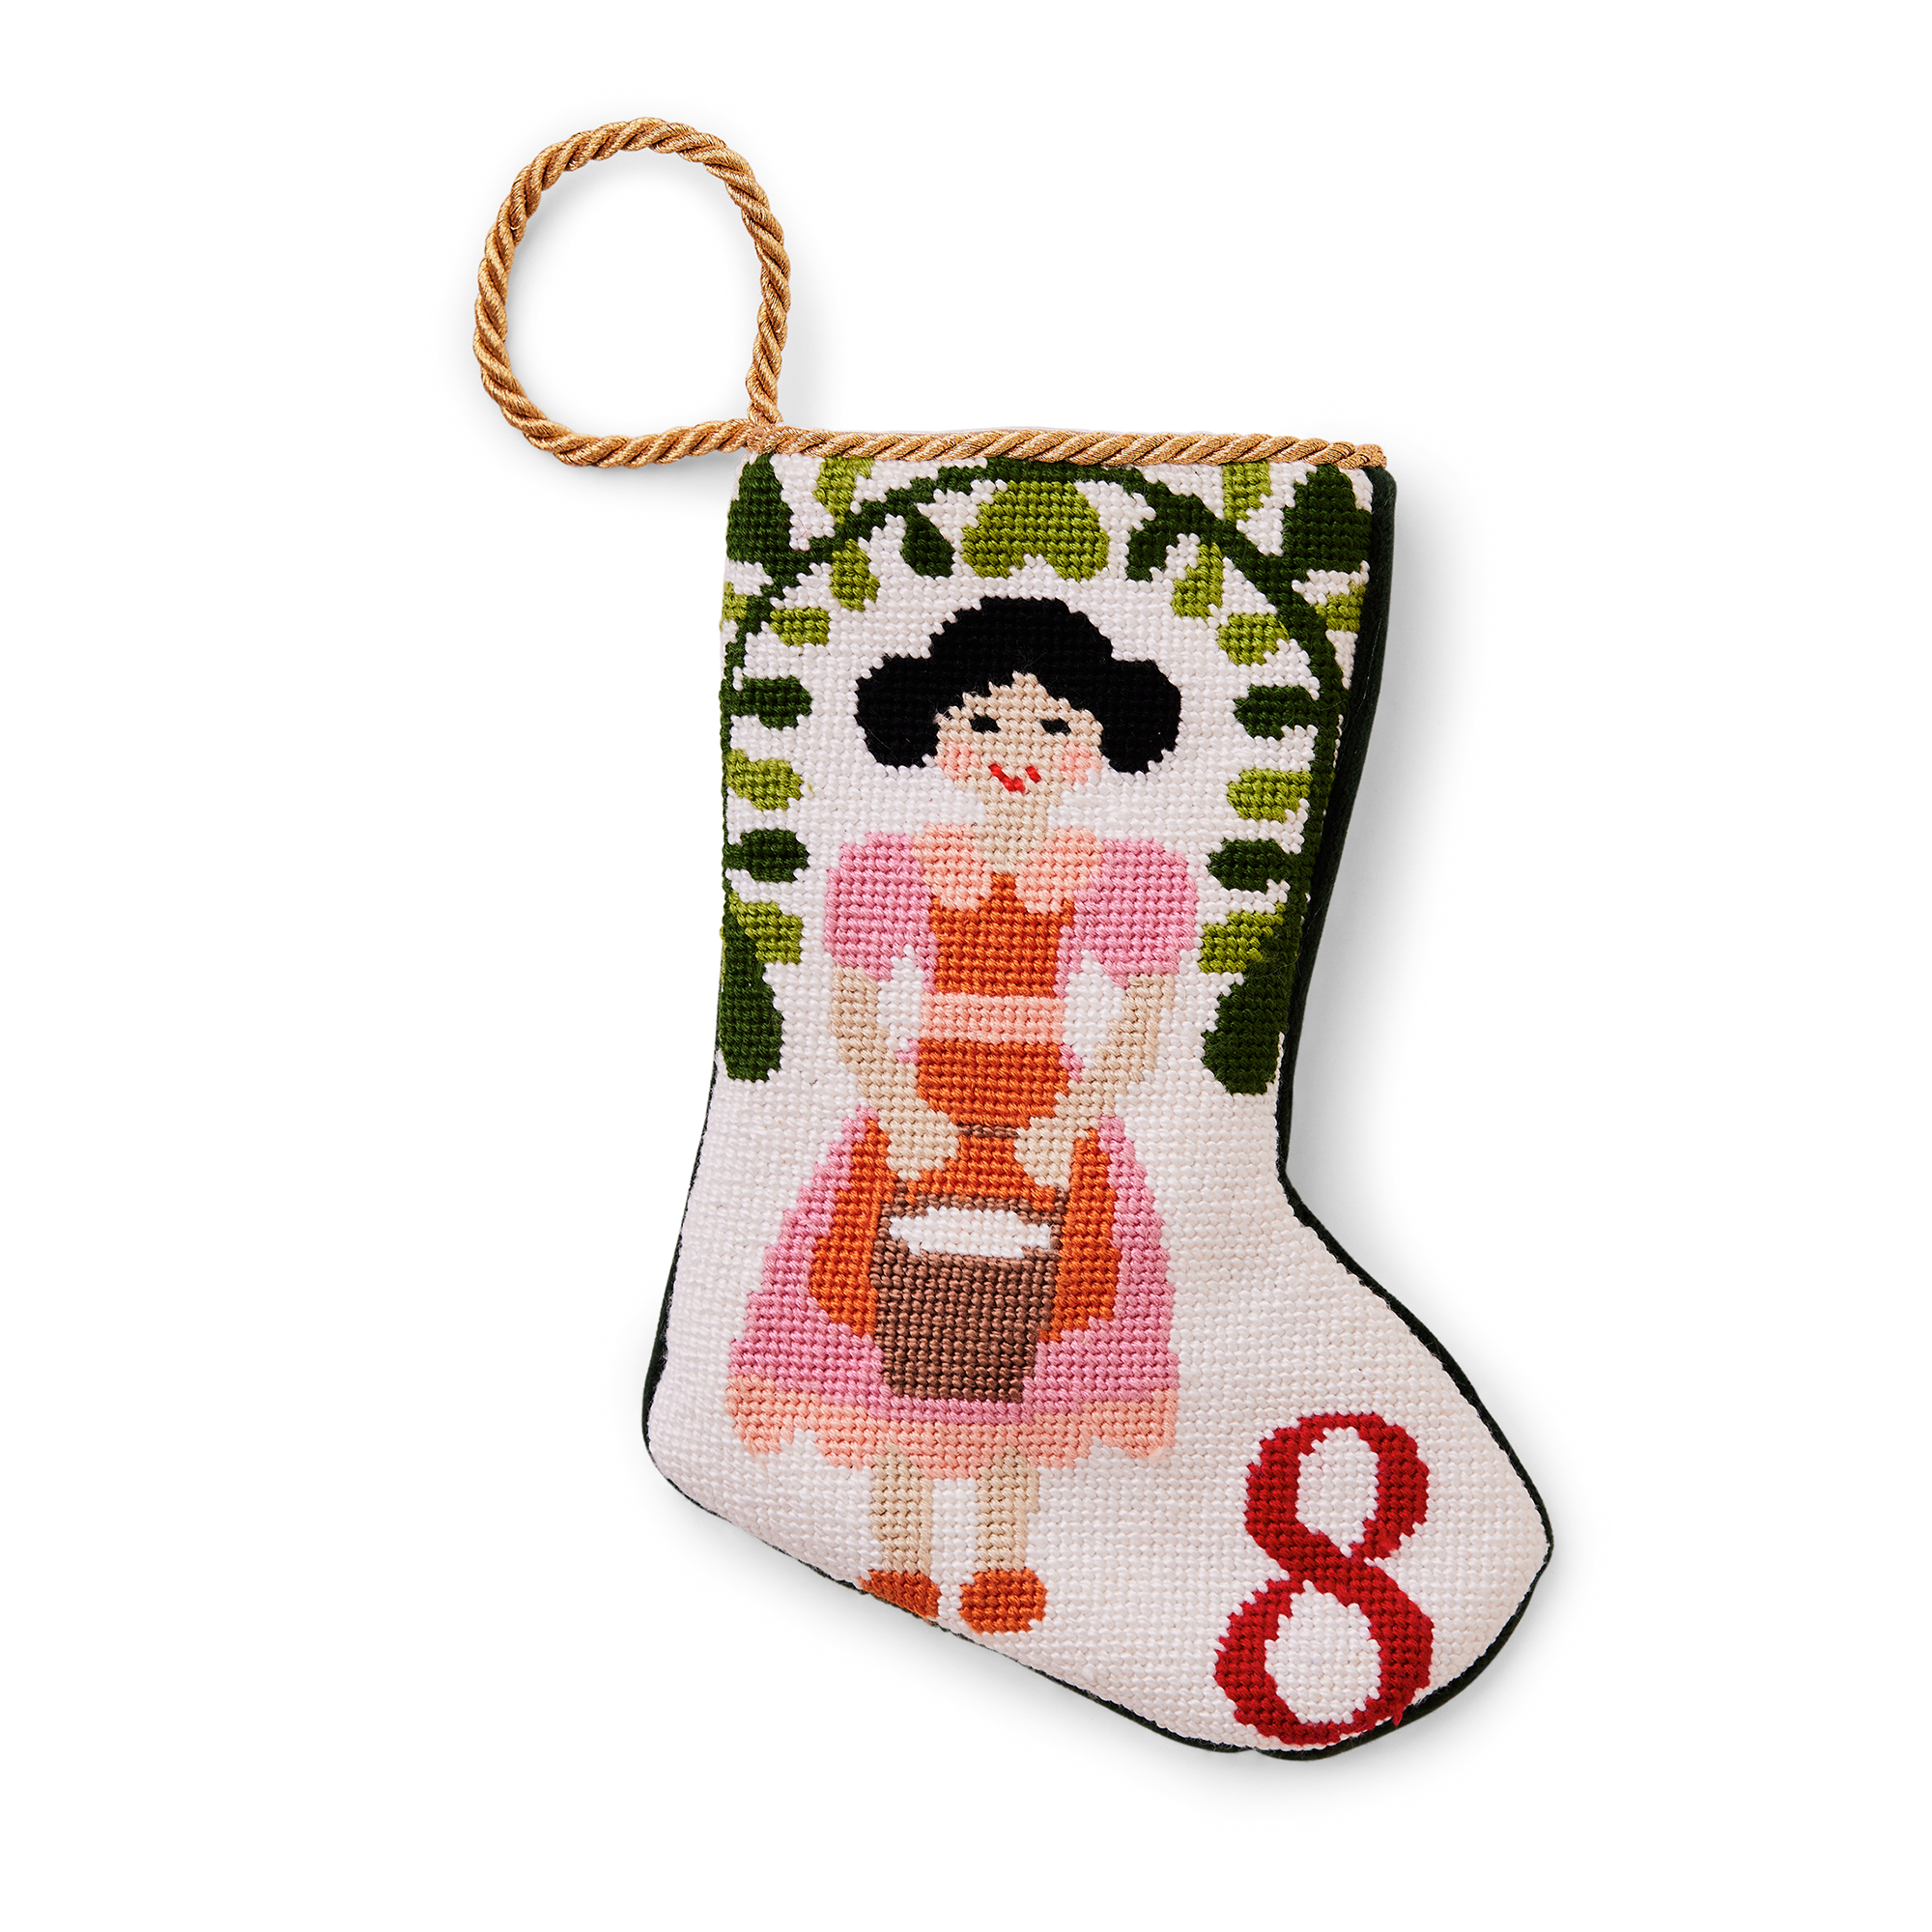 An intricately designed mini needlepoint stocking featuring the '8 Maids a Milking' from the classic Christmas carol. This festive decoration adds a traditional and charming touch to your holiday decor. Perfect as tree ornaments, place settings, or for holding special gifts.